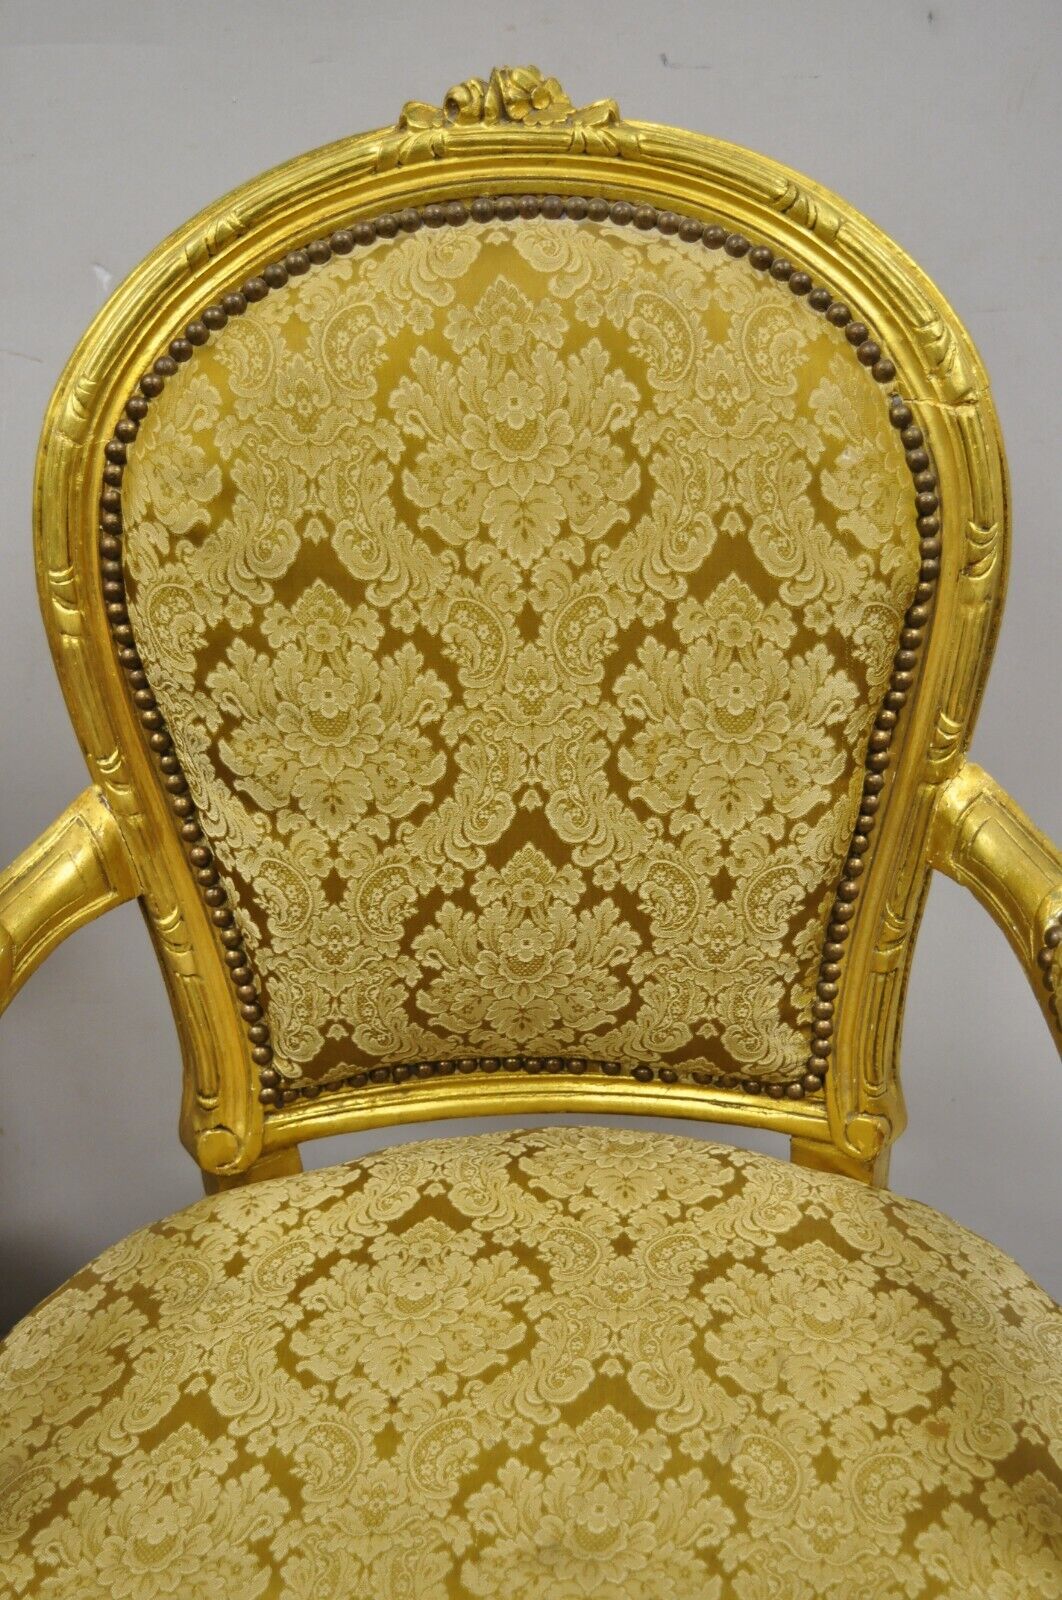 Vintage French Louis XVI Gold Leaf Balloon Back Fauteuil Arm Chairs - a Pair